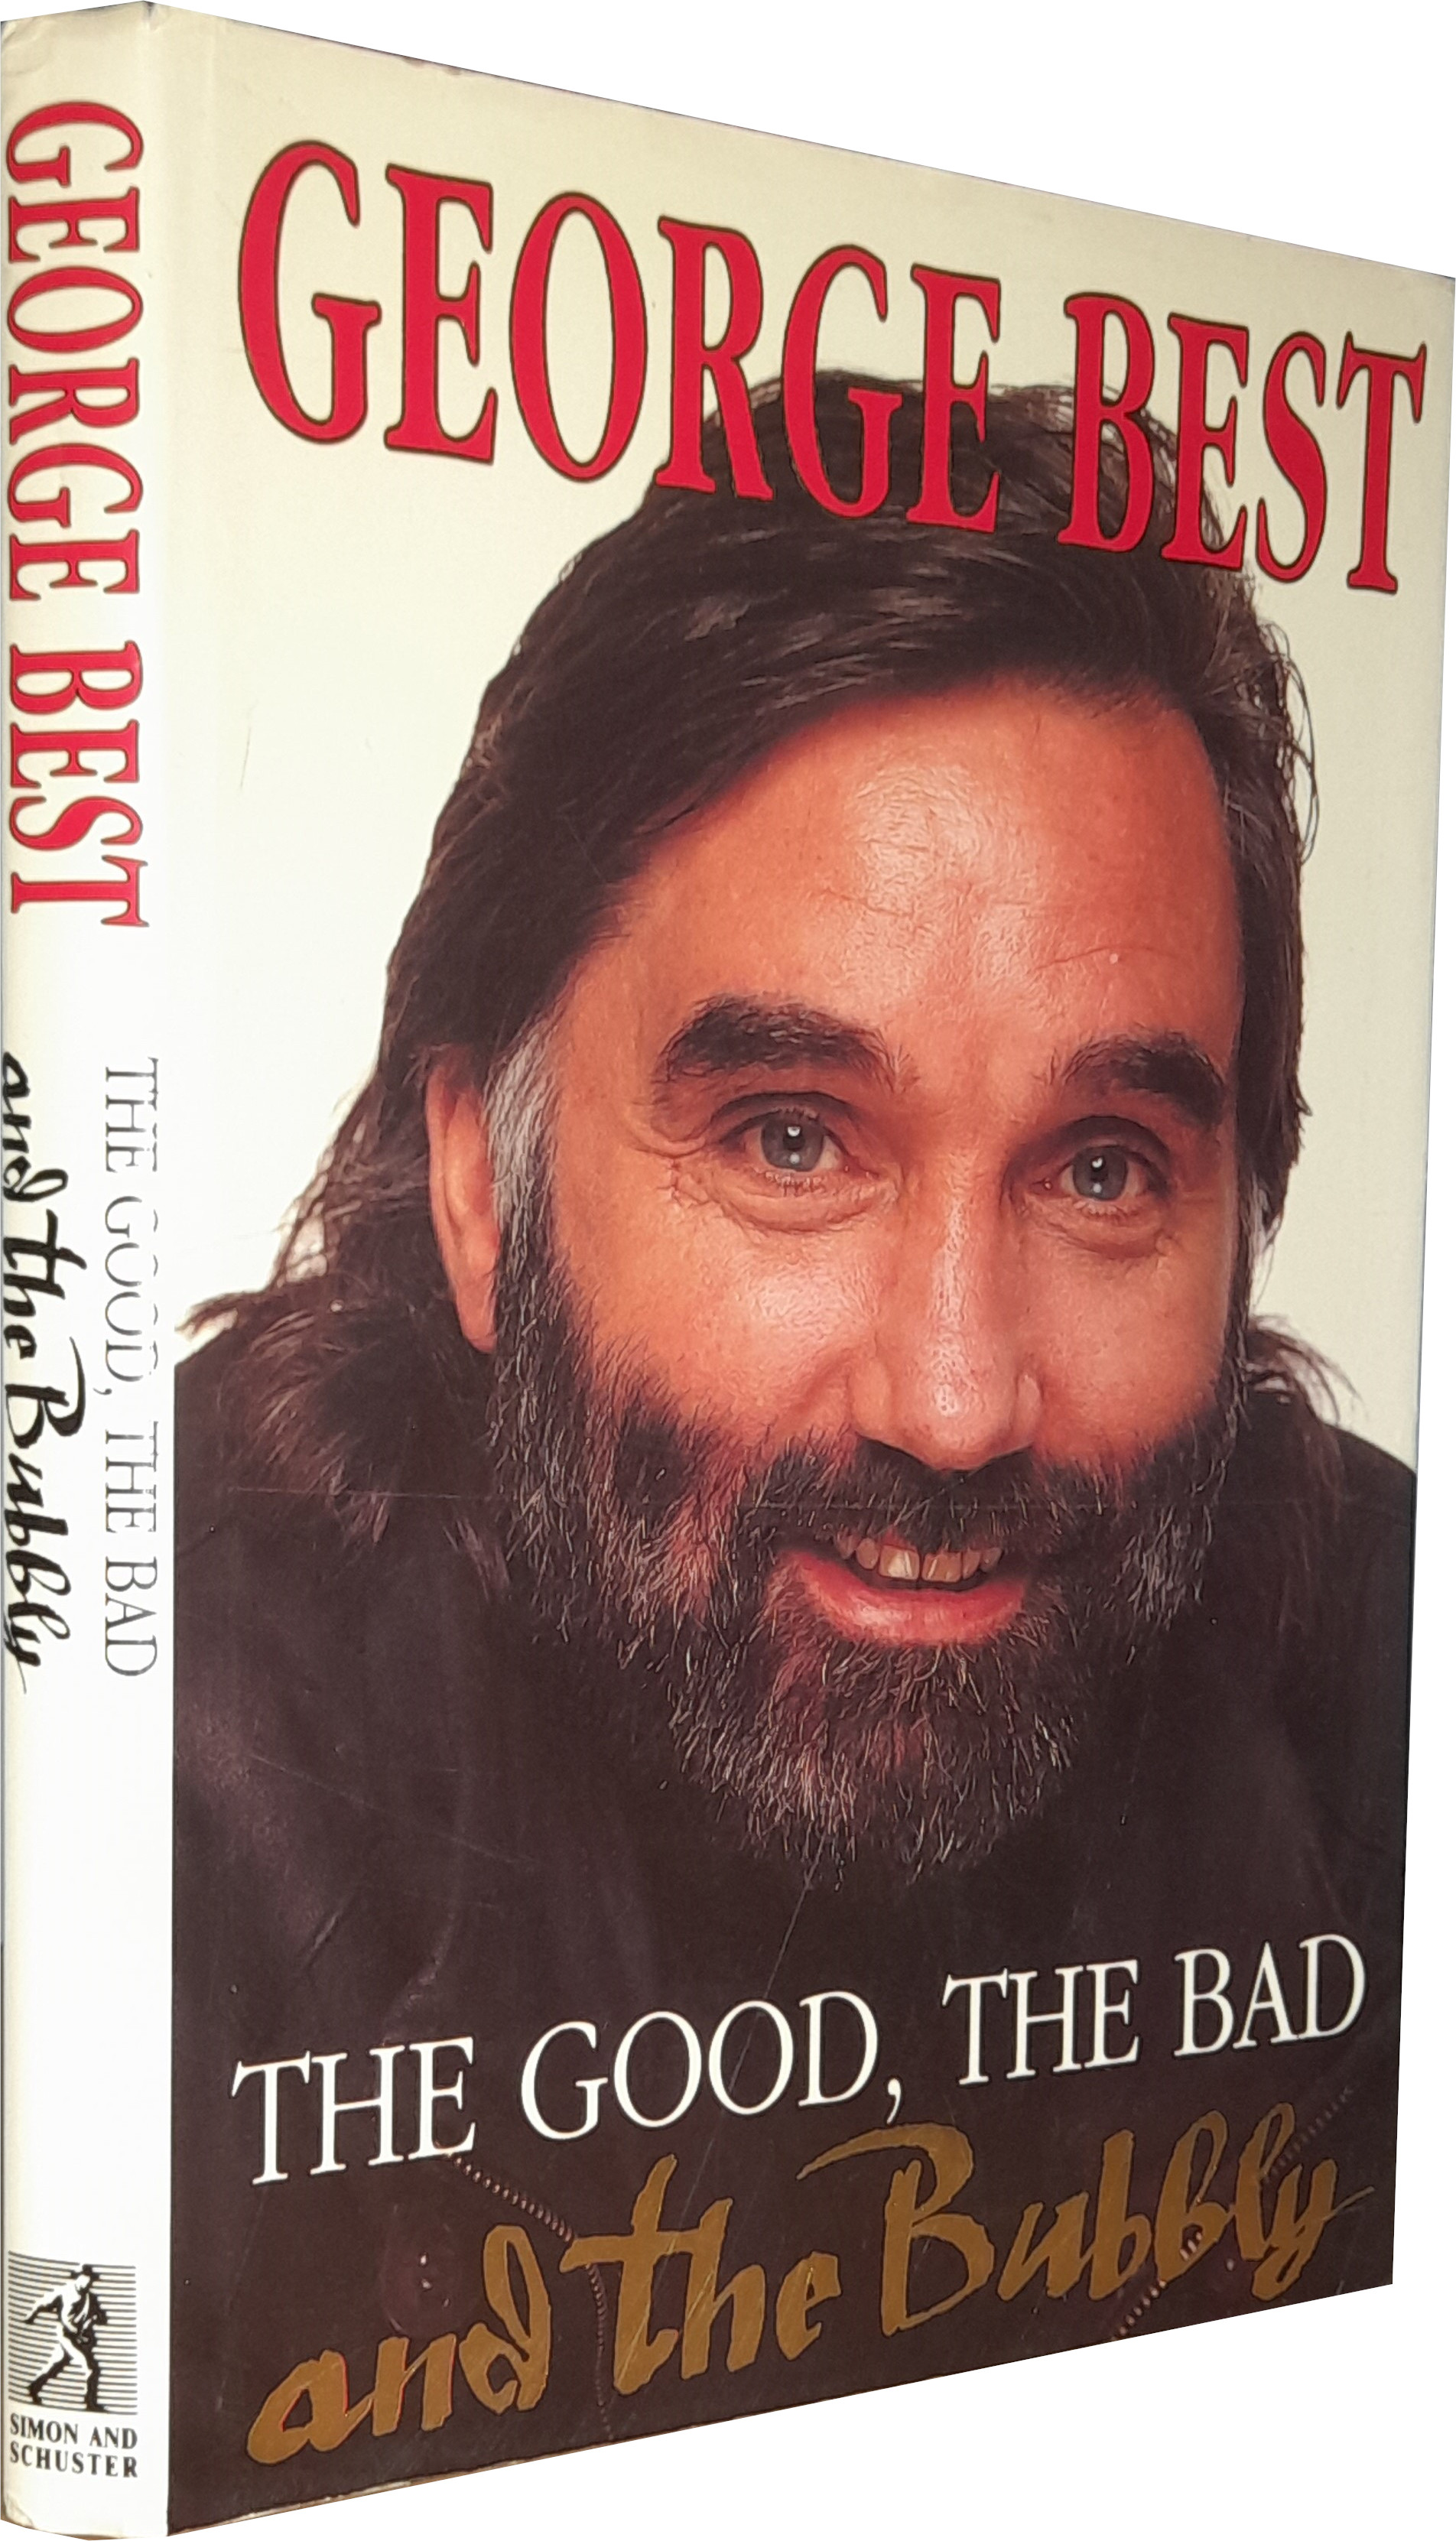 MANCHESTER UNITED GEORGE BEST MULTI SIGNED BOOK